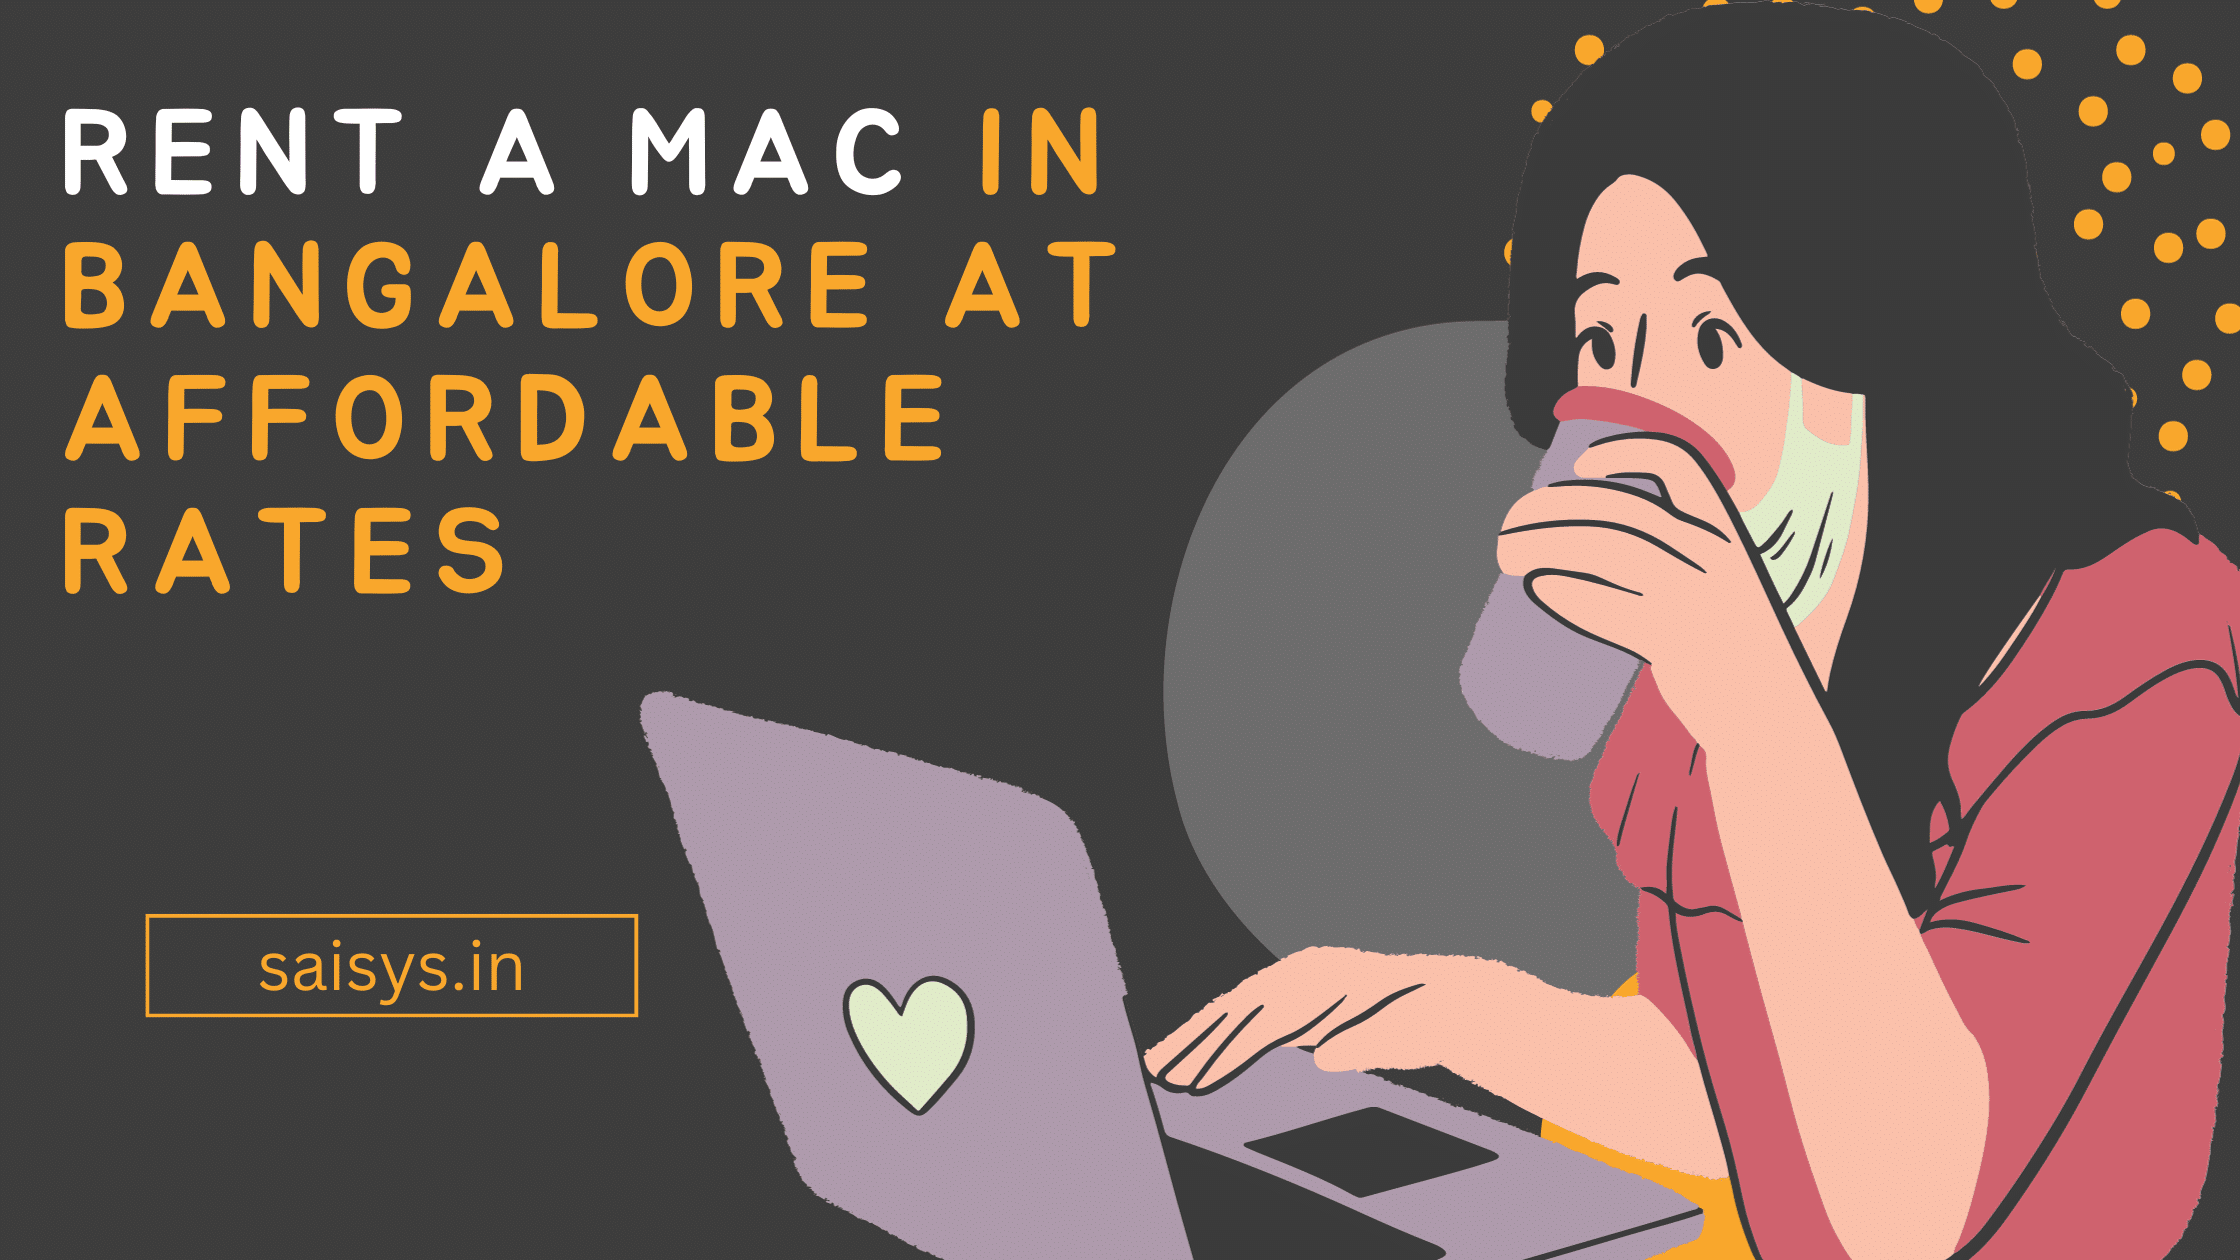 Rent a Mac in Bangalore at Affordable Rates